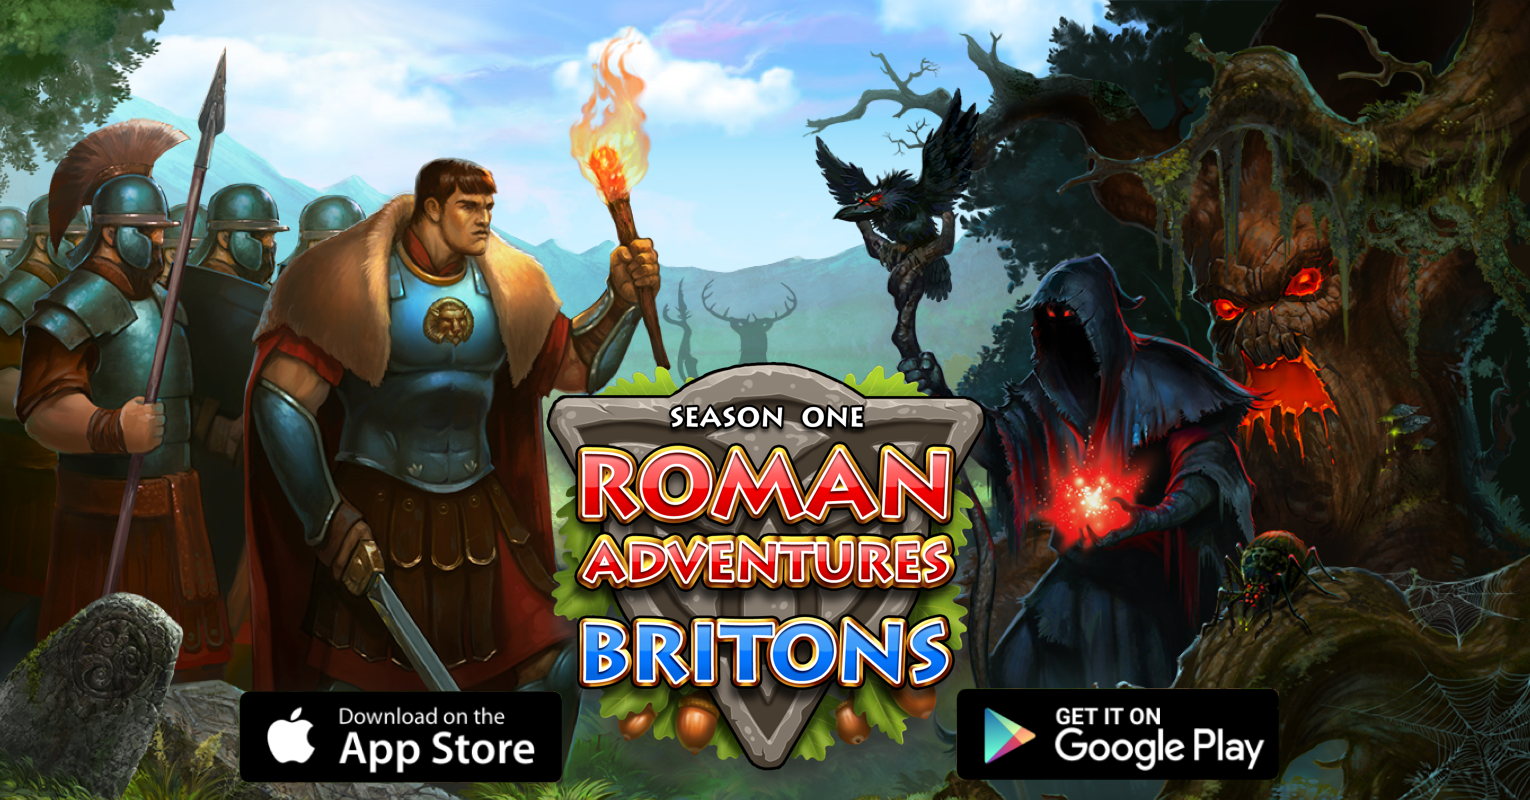 Roman Adventures: Britons Season 1 is now available for iOS and Android!